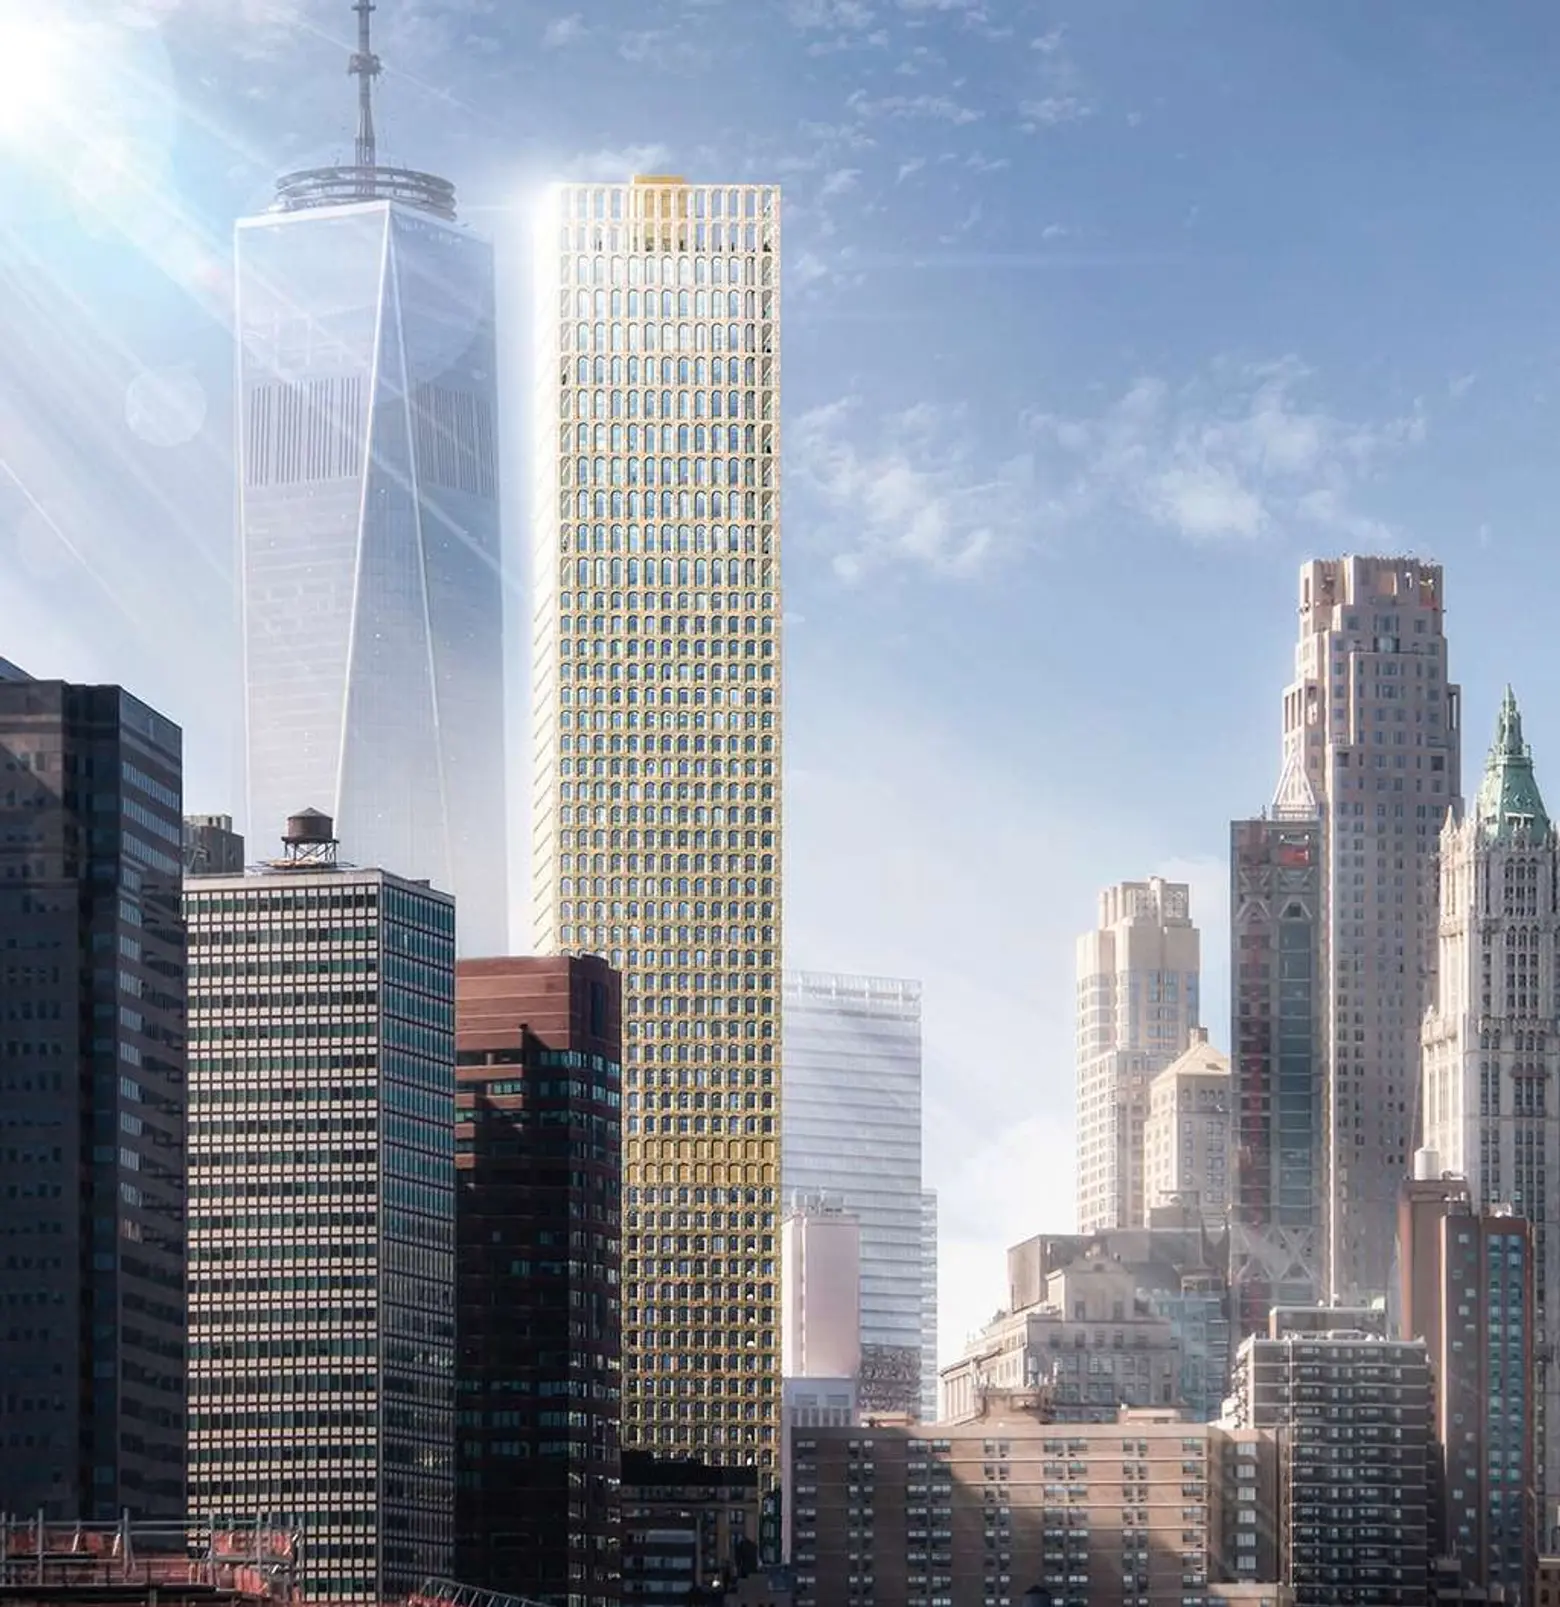 REVEALED: Early studies of David Adjaye’s Wall Street Tower, his first skyscraper in NYC